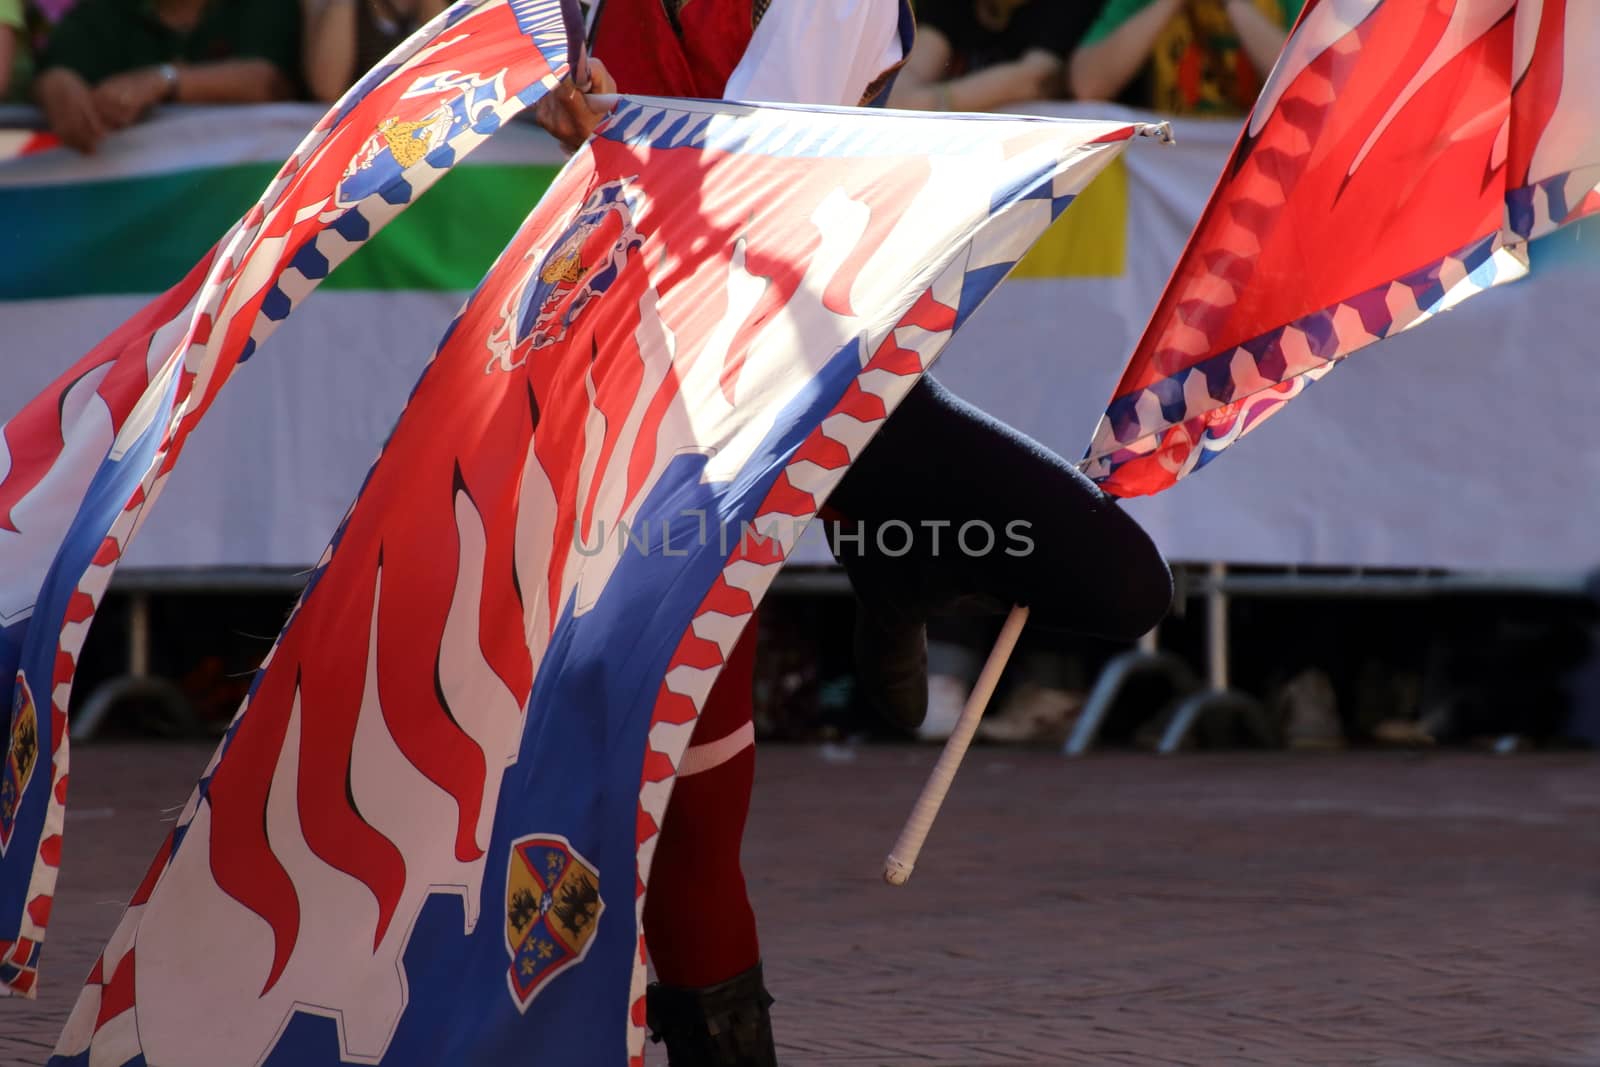 Palio, the city celebrates with competitions of the flag wavers and the parade of the districts